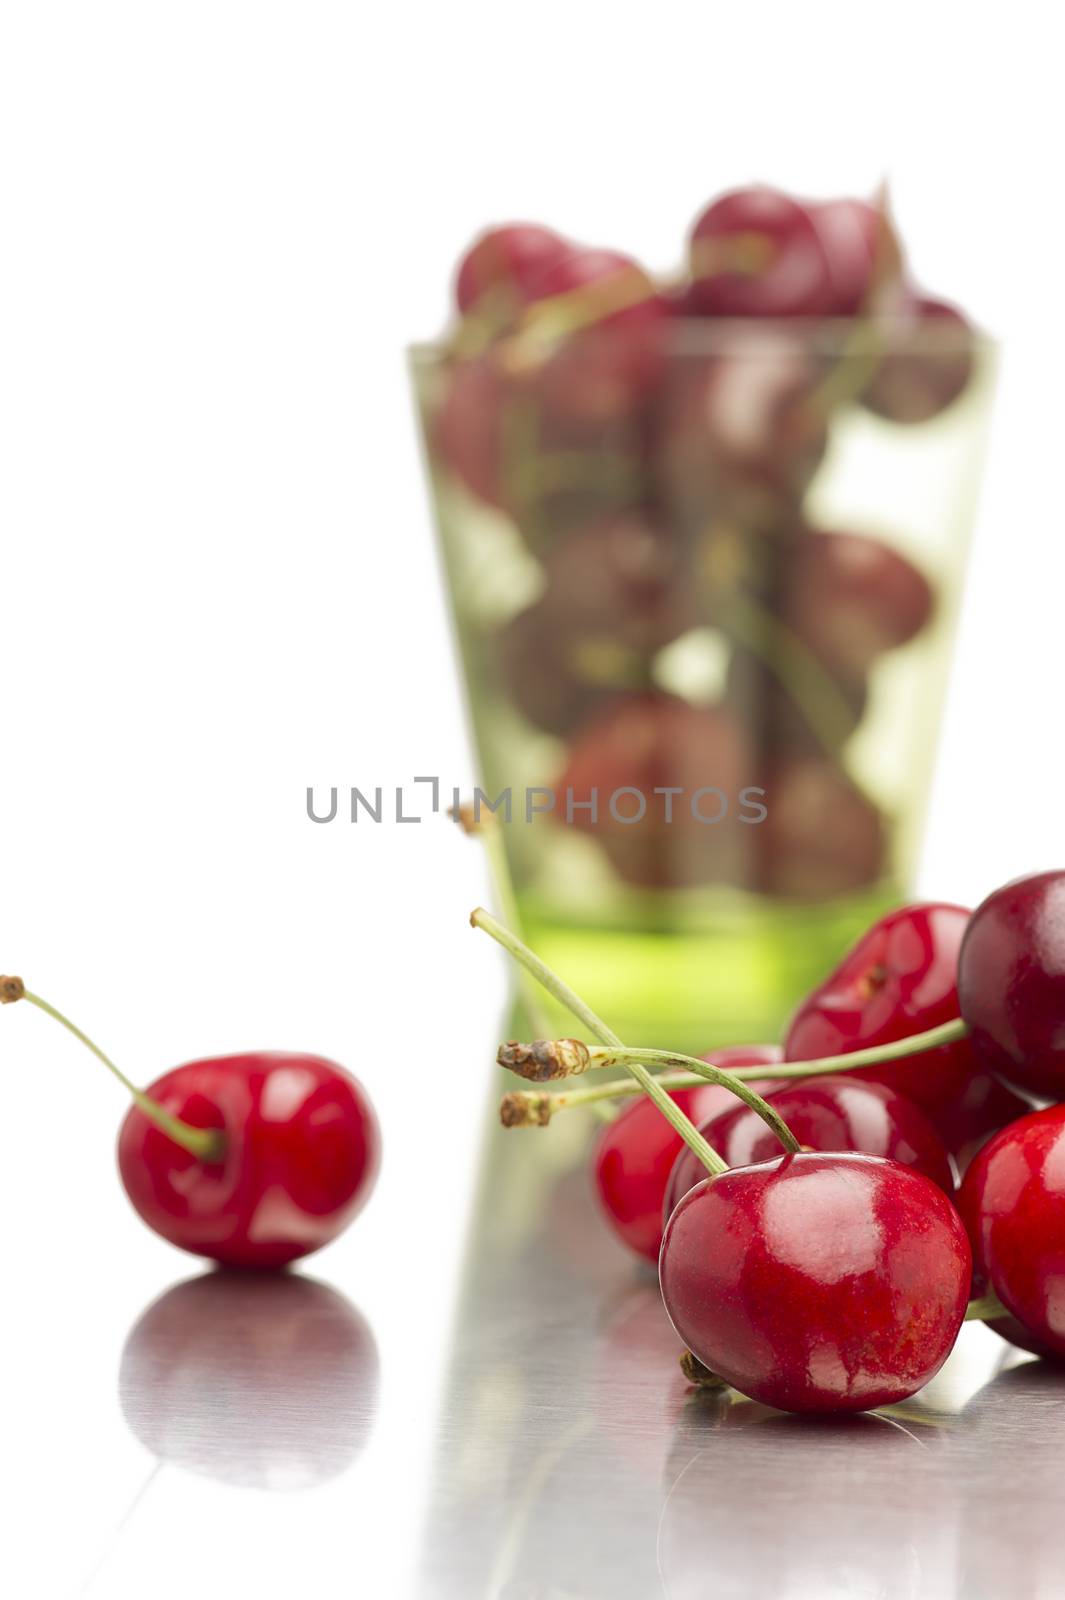 Loose ripe red cherries on a reflective surface by MOELLERTHOMSEN